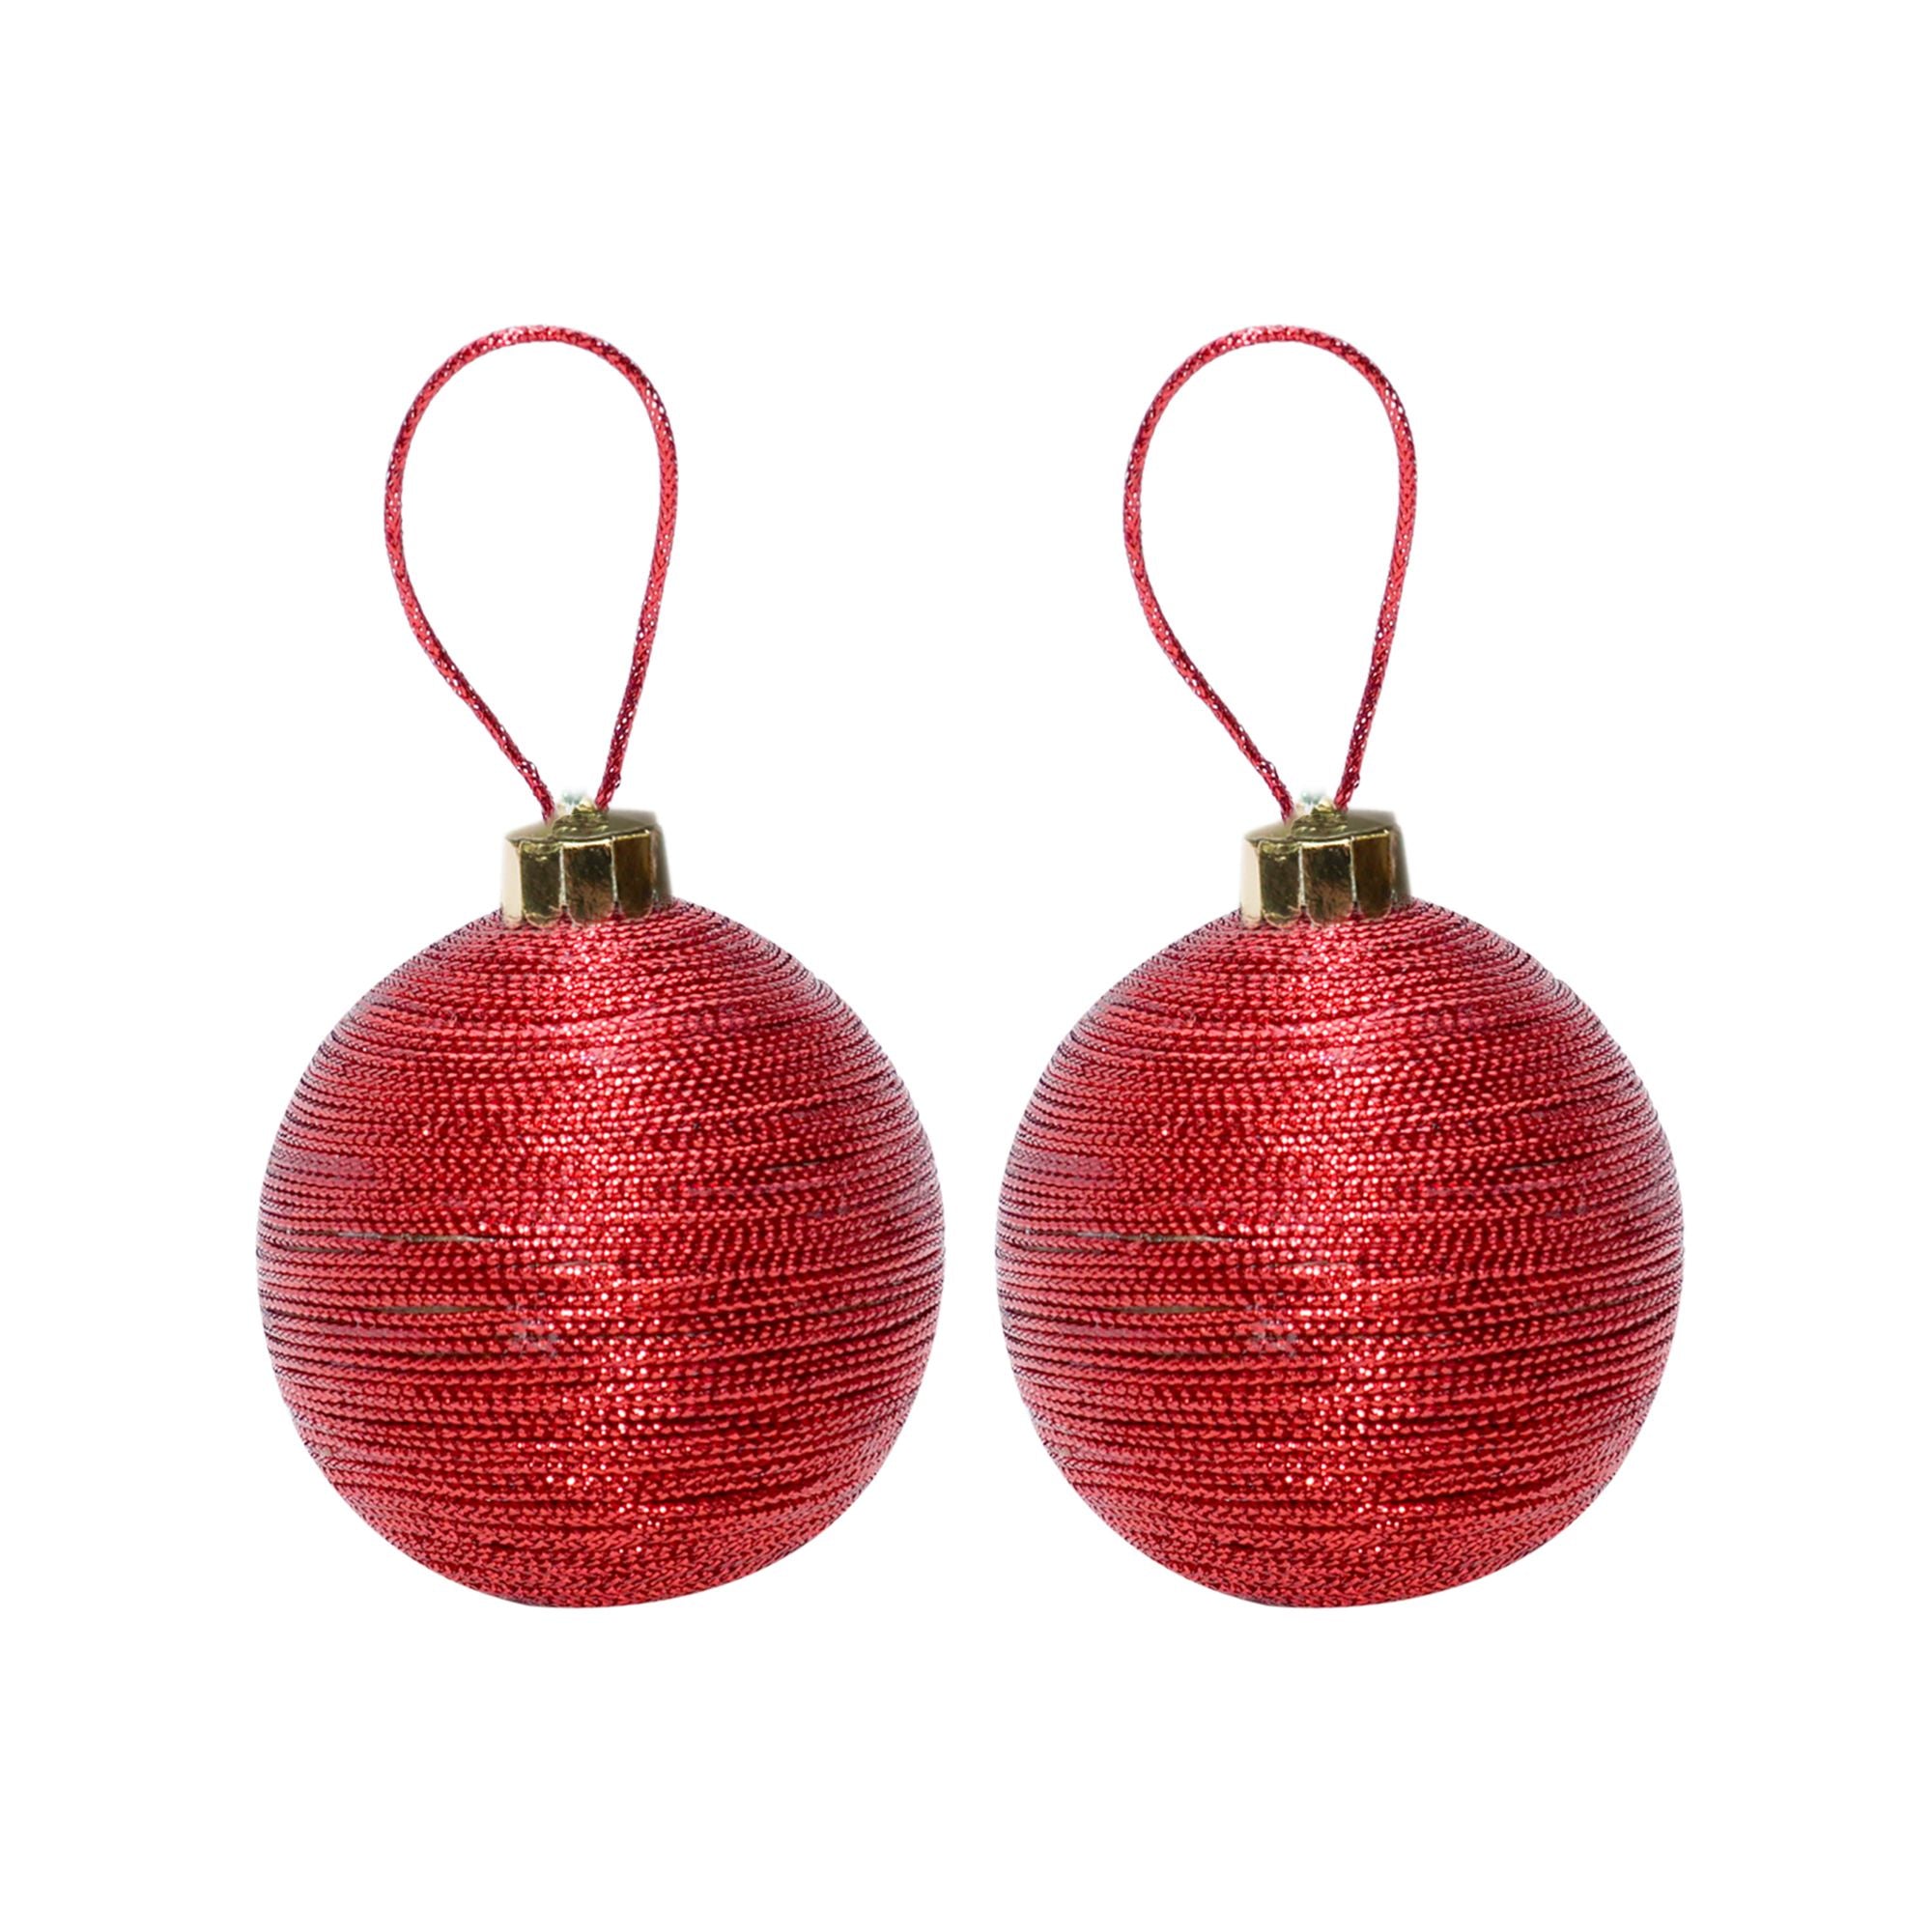 Handmade Christmas Ornaments - Lurex Baubles, 70mm, Red, 2pc